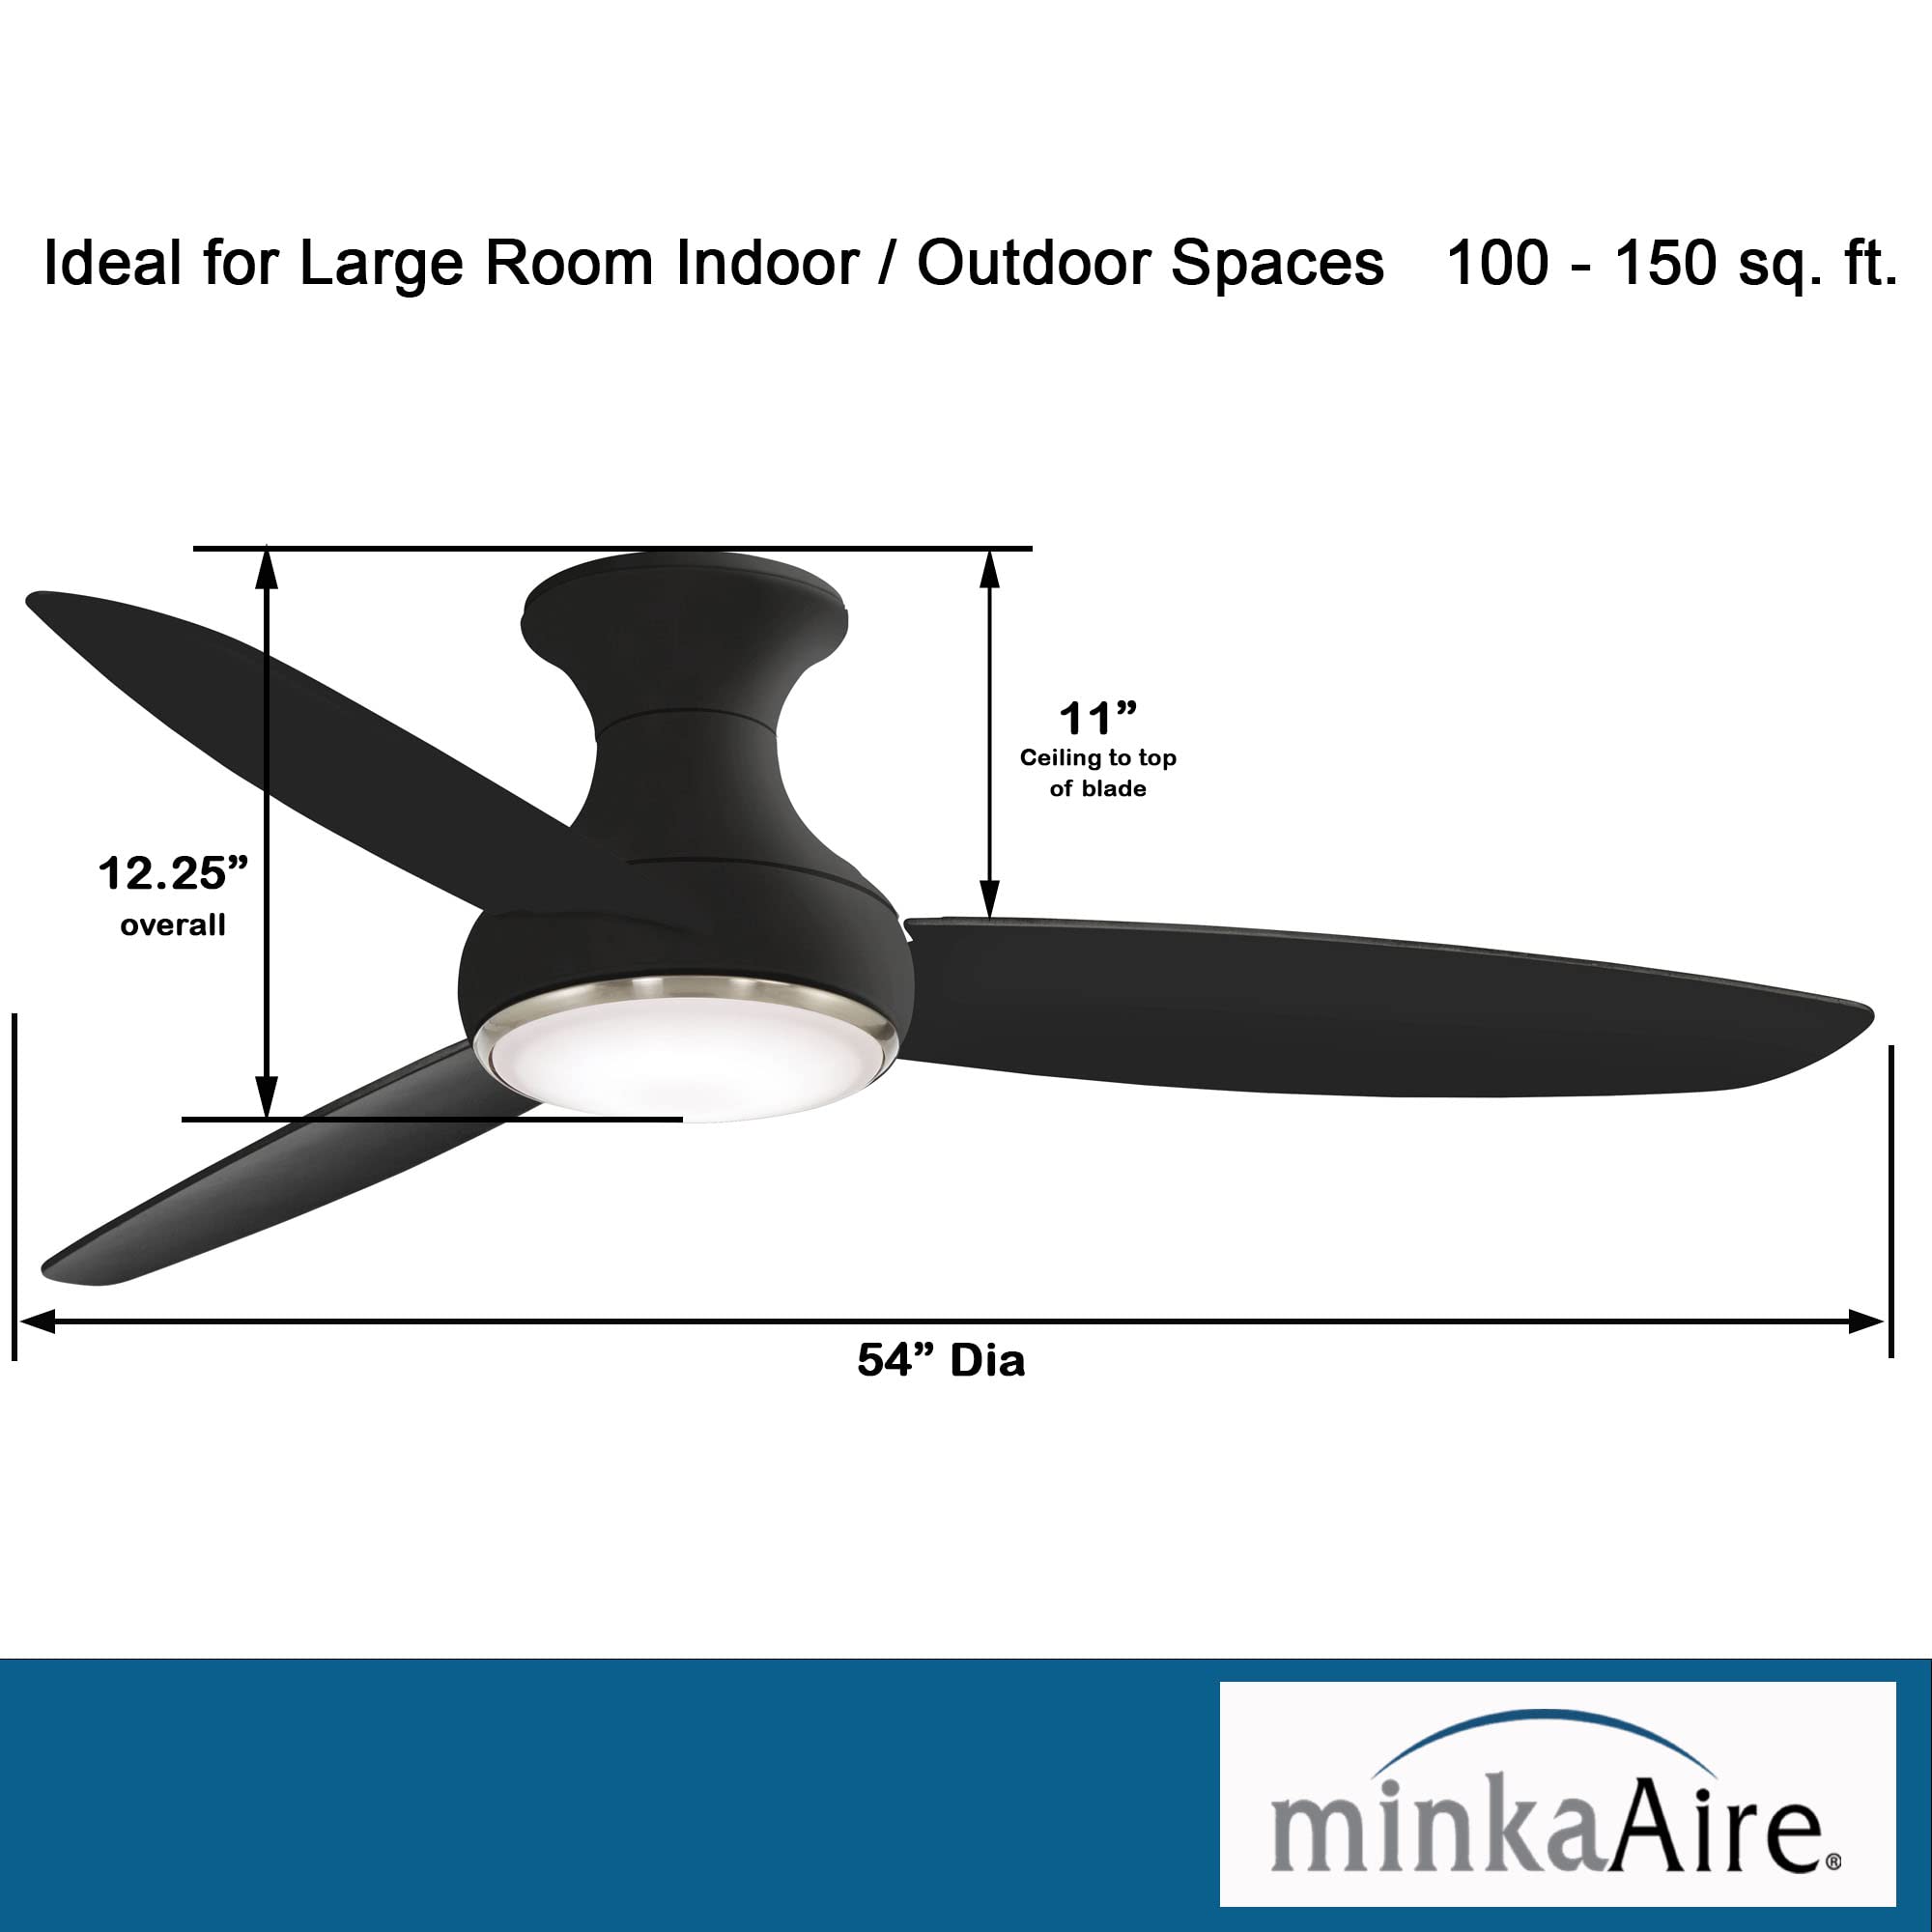 Minka Aire F467L-CL Concept III - 54 Inch Ceiling Fan with Light Kit, Coal Finish with Coal Blade Finish with Etched Opal Glass